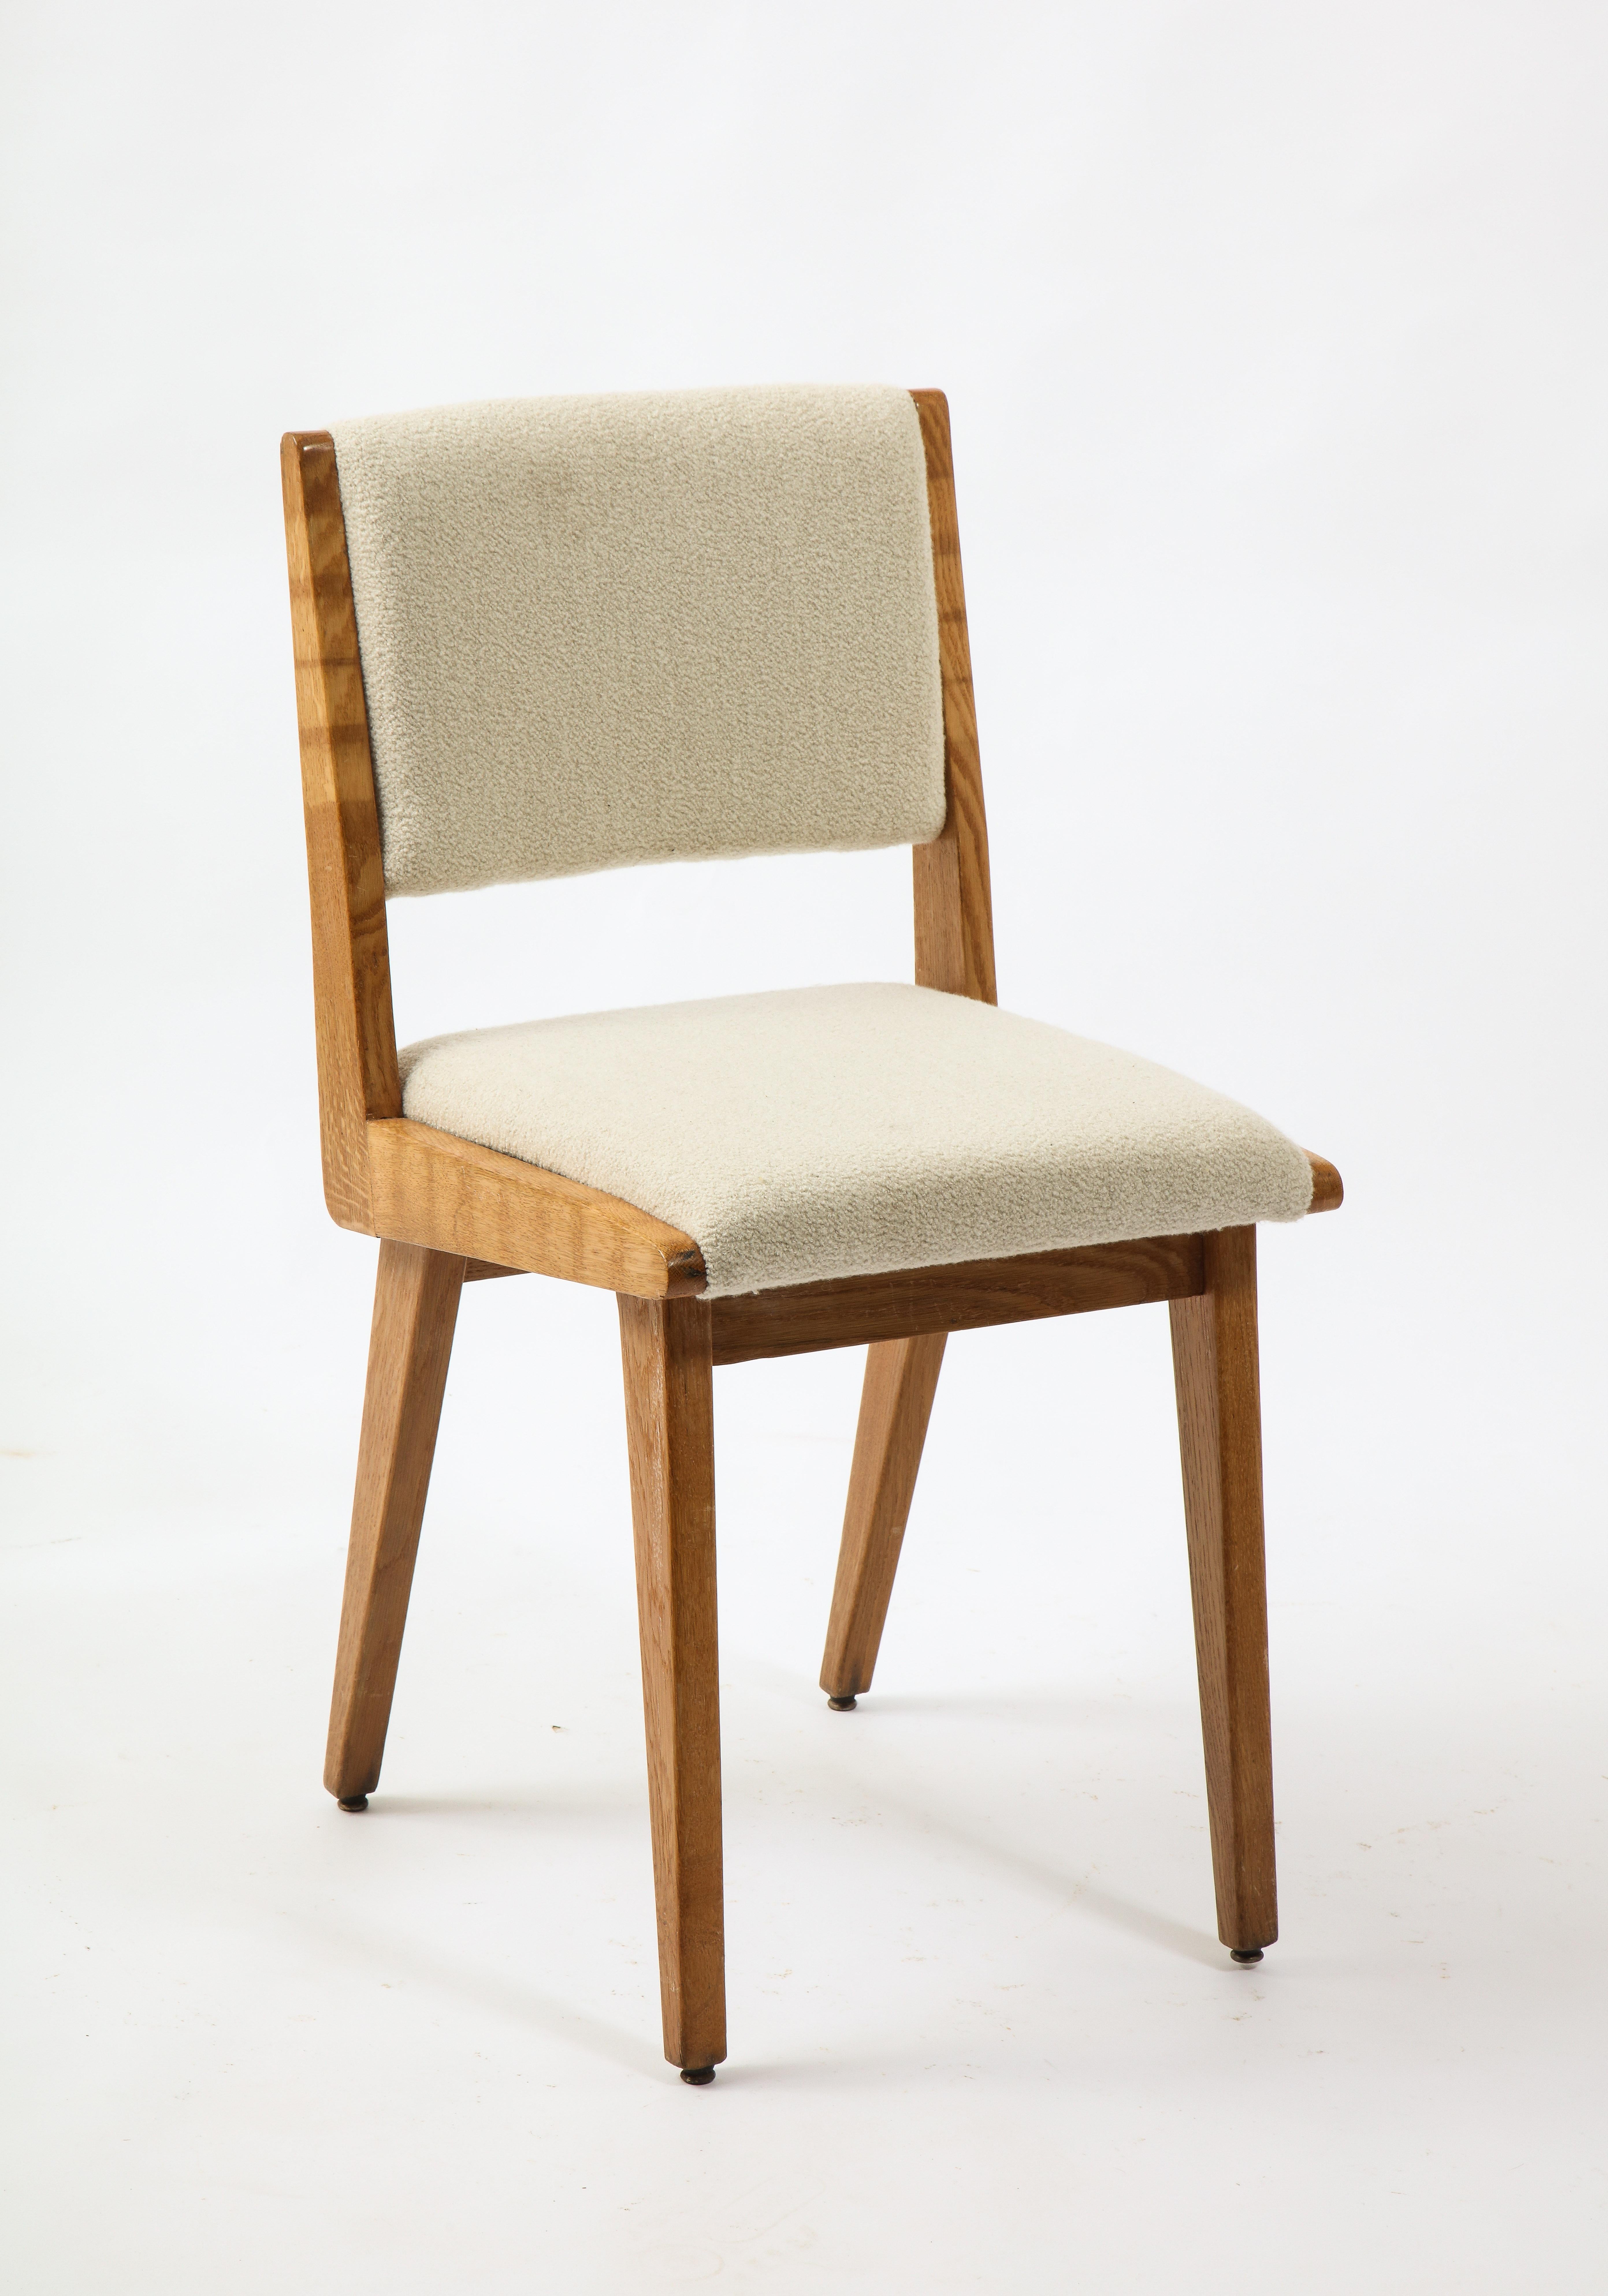 Jens Risom Set of 12 Upholstered Oak Dining Side Chairs, USA 1960's For Sale 6